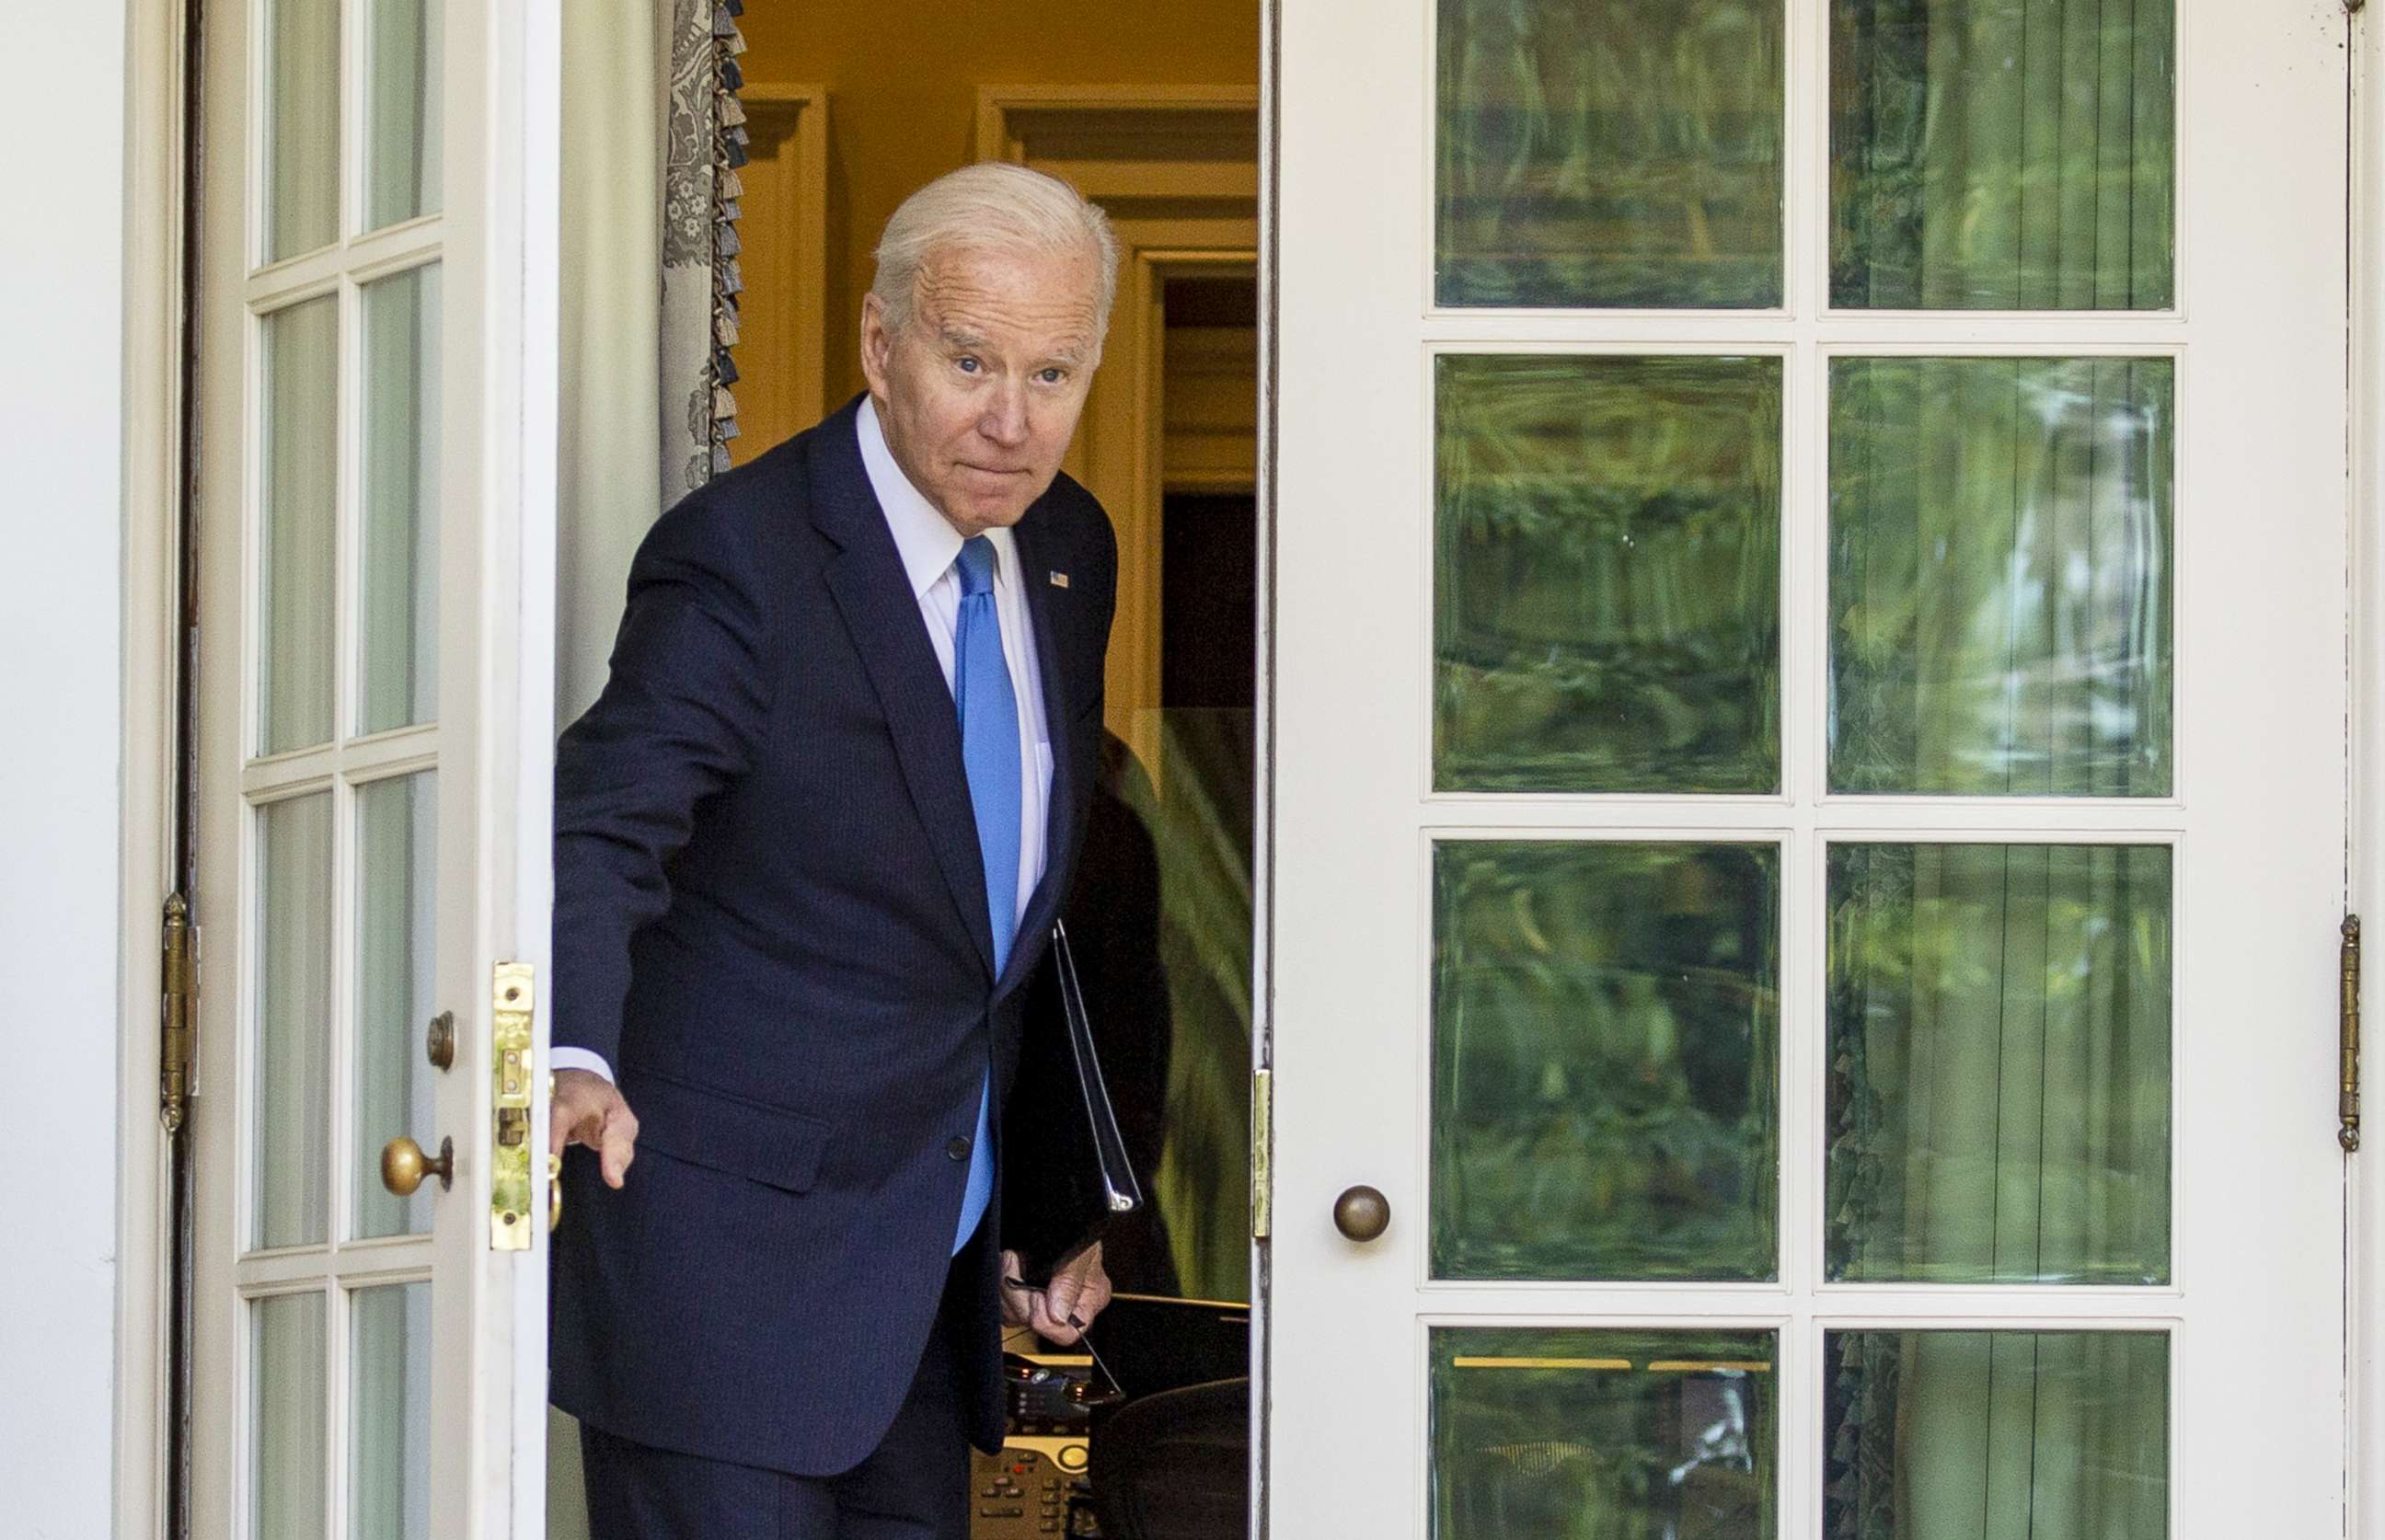 PHOTO: President Joe Biden departs the Rose Garden after speaking at the White House, May 13, 2021.